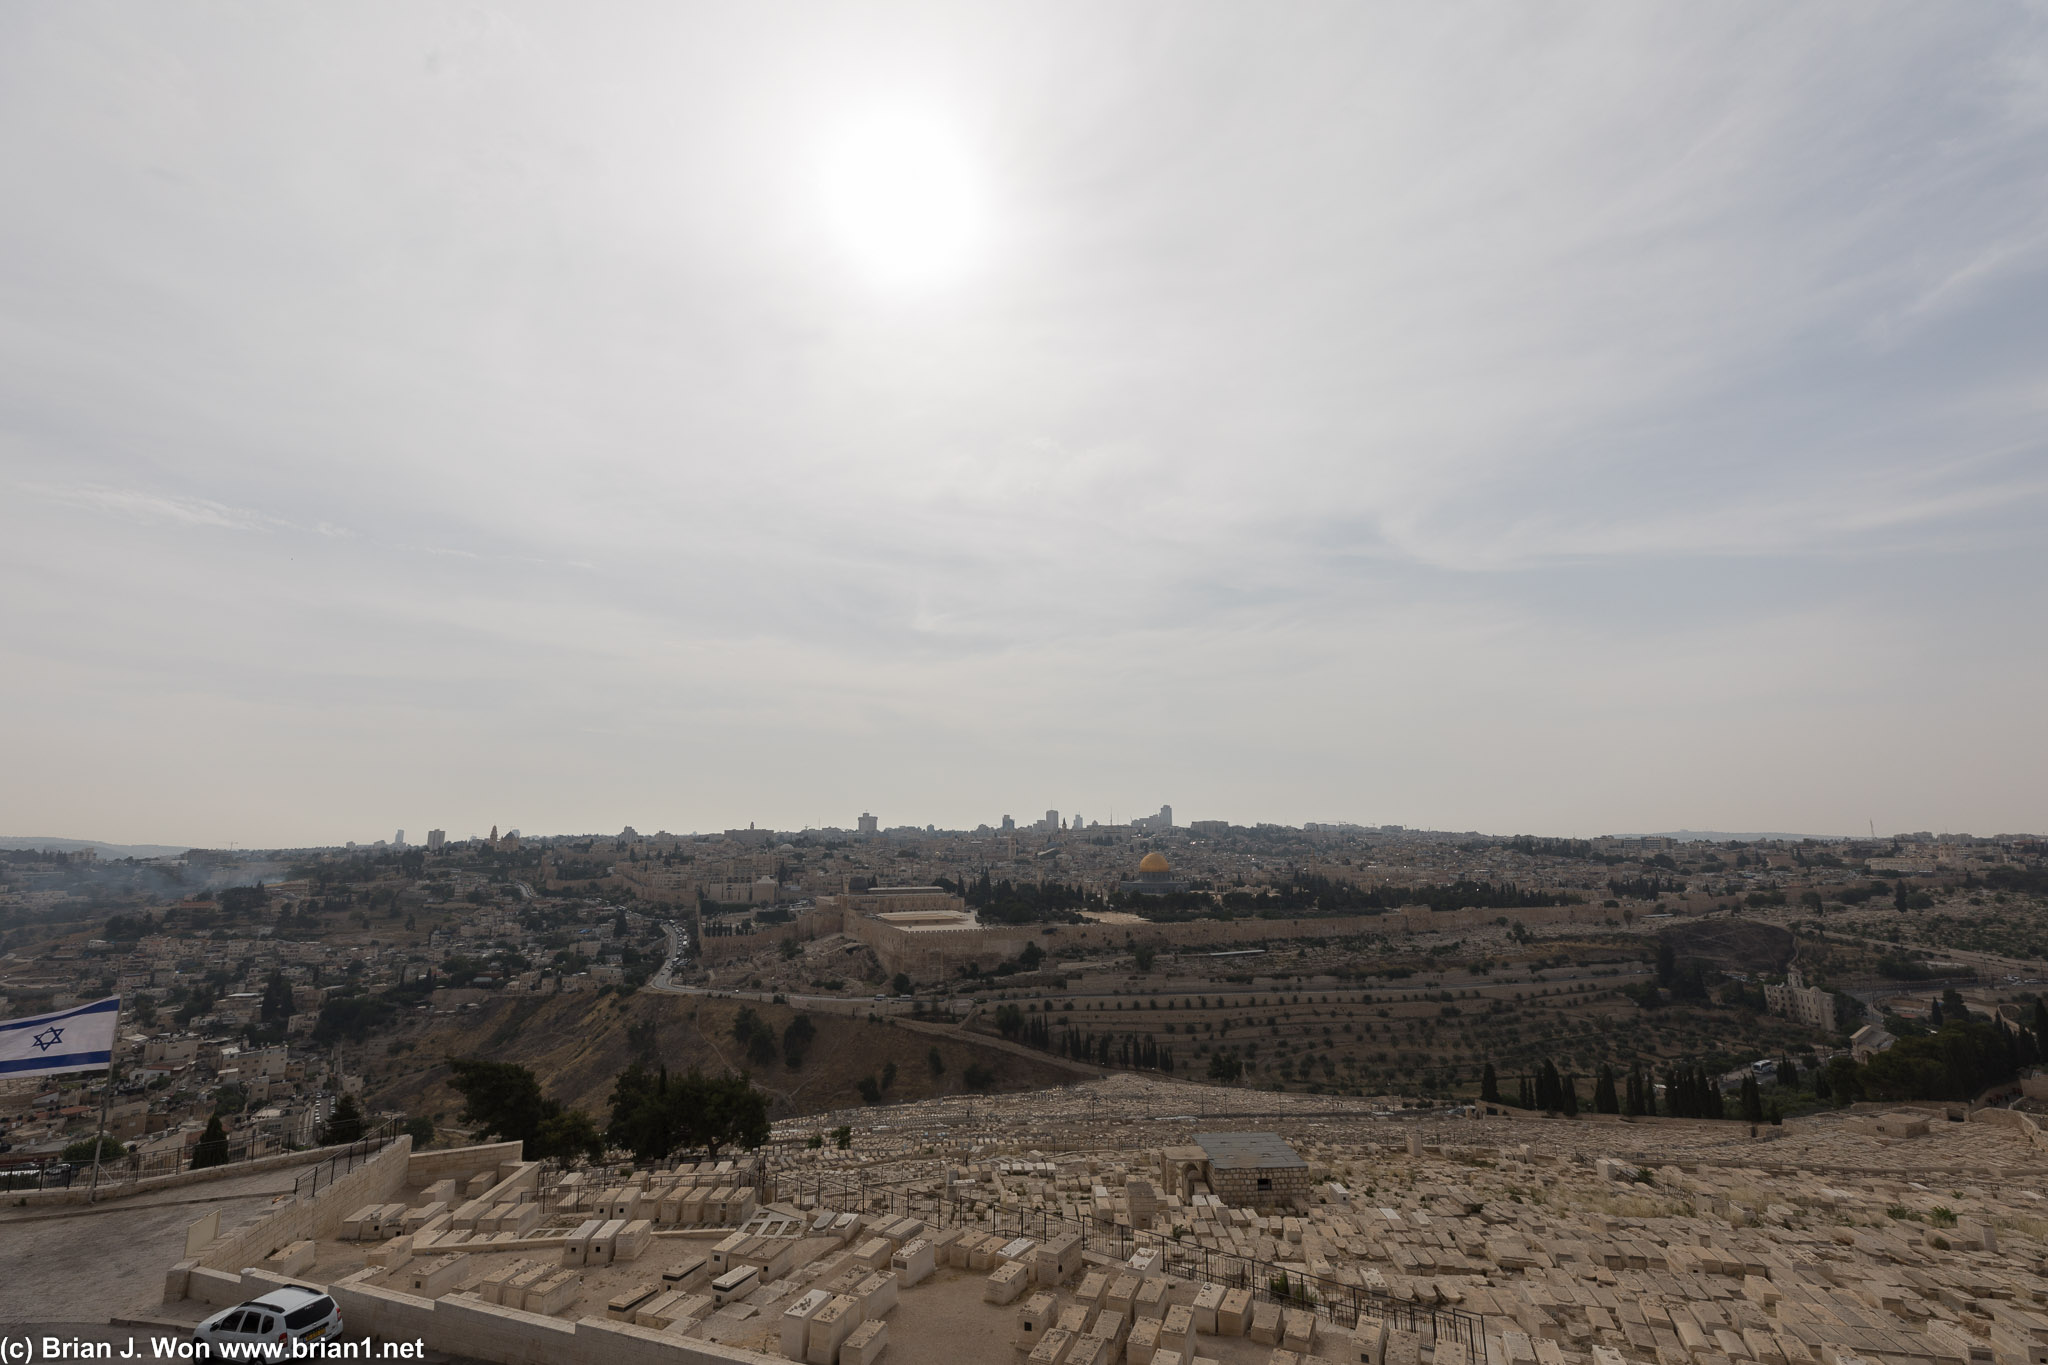 The view from Mount of Olives.